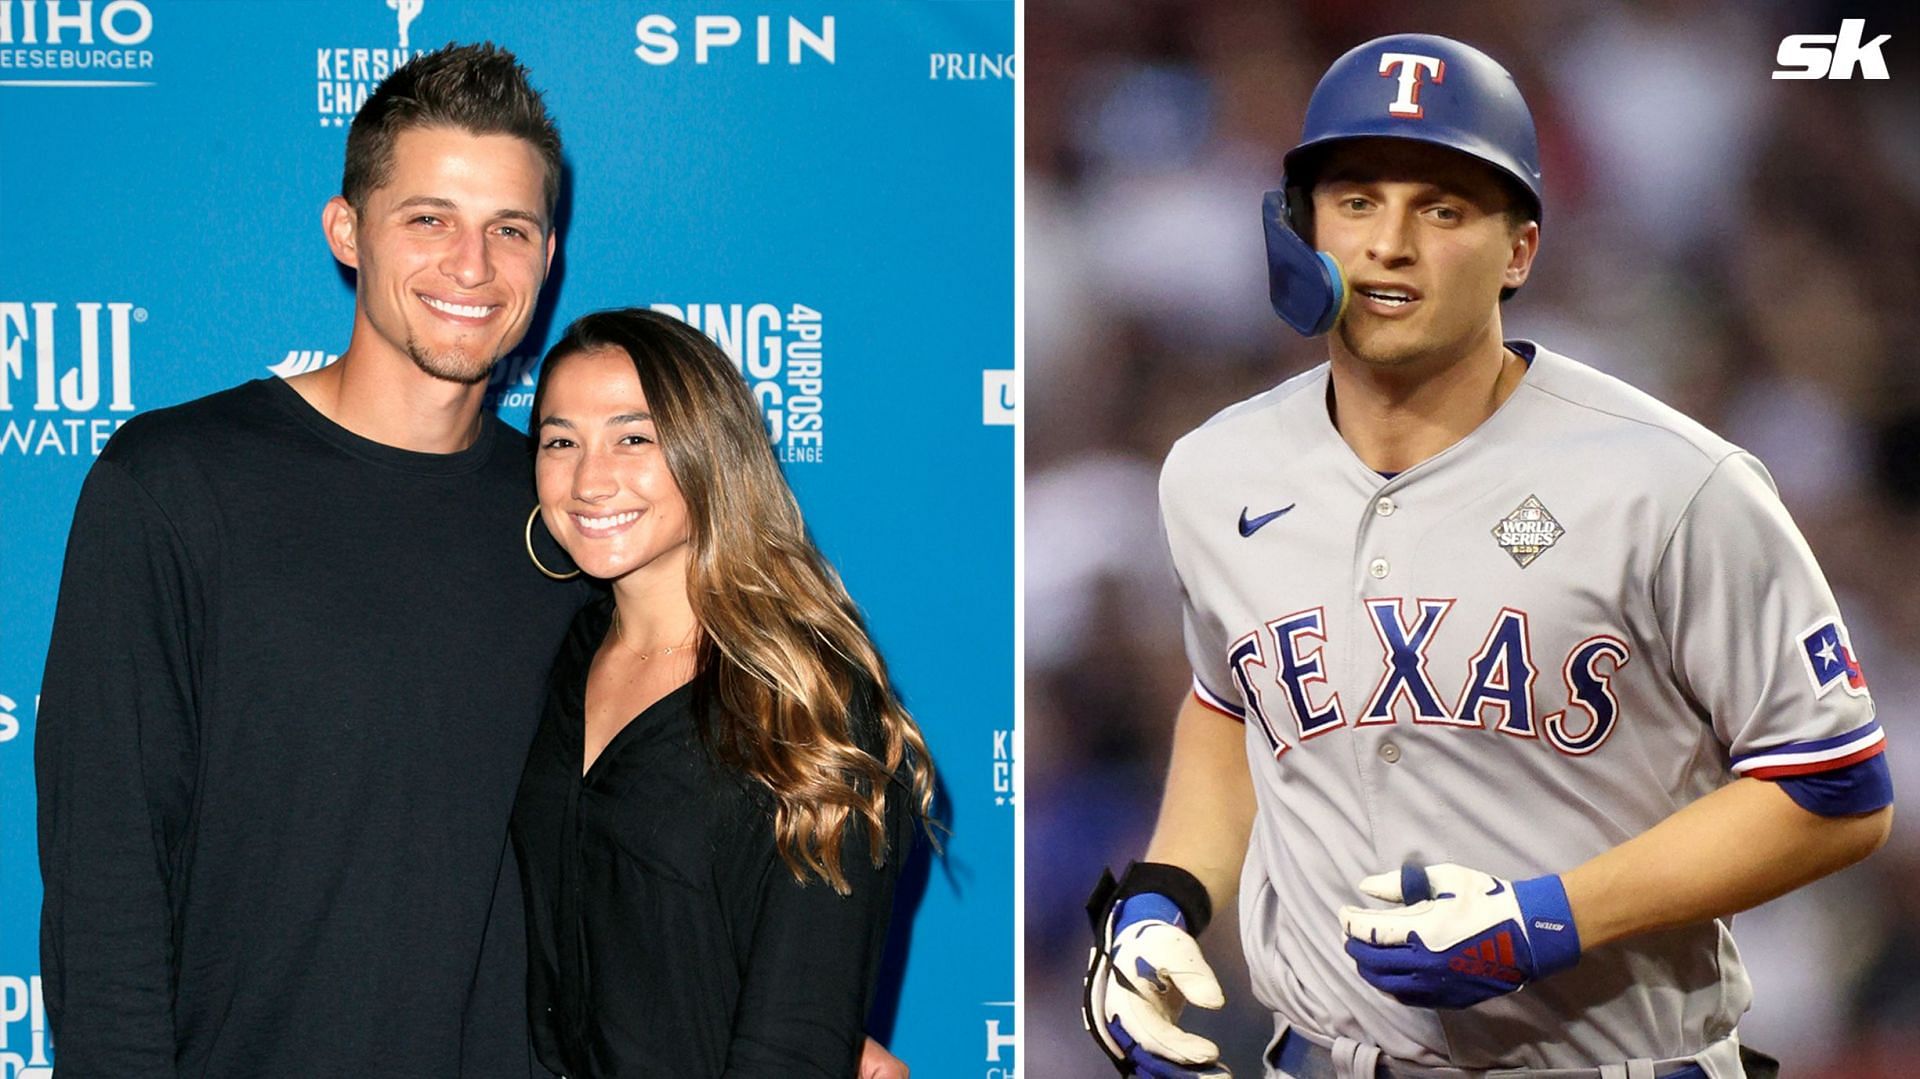 Corey Seager and his wife Madisyn enjoyed a lovely date night in Philadelphia during the Rangers